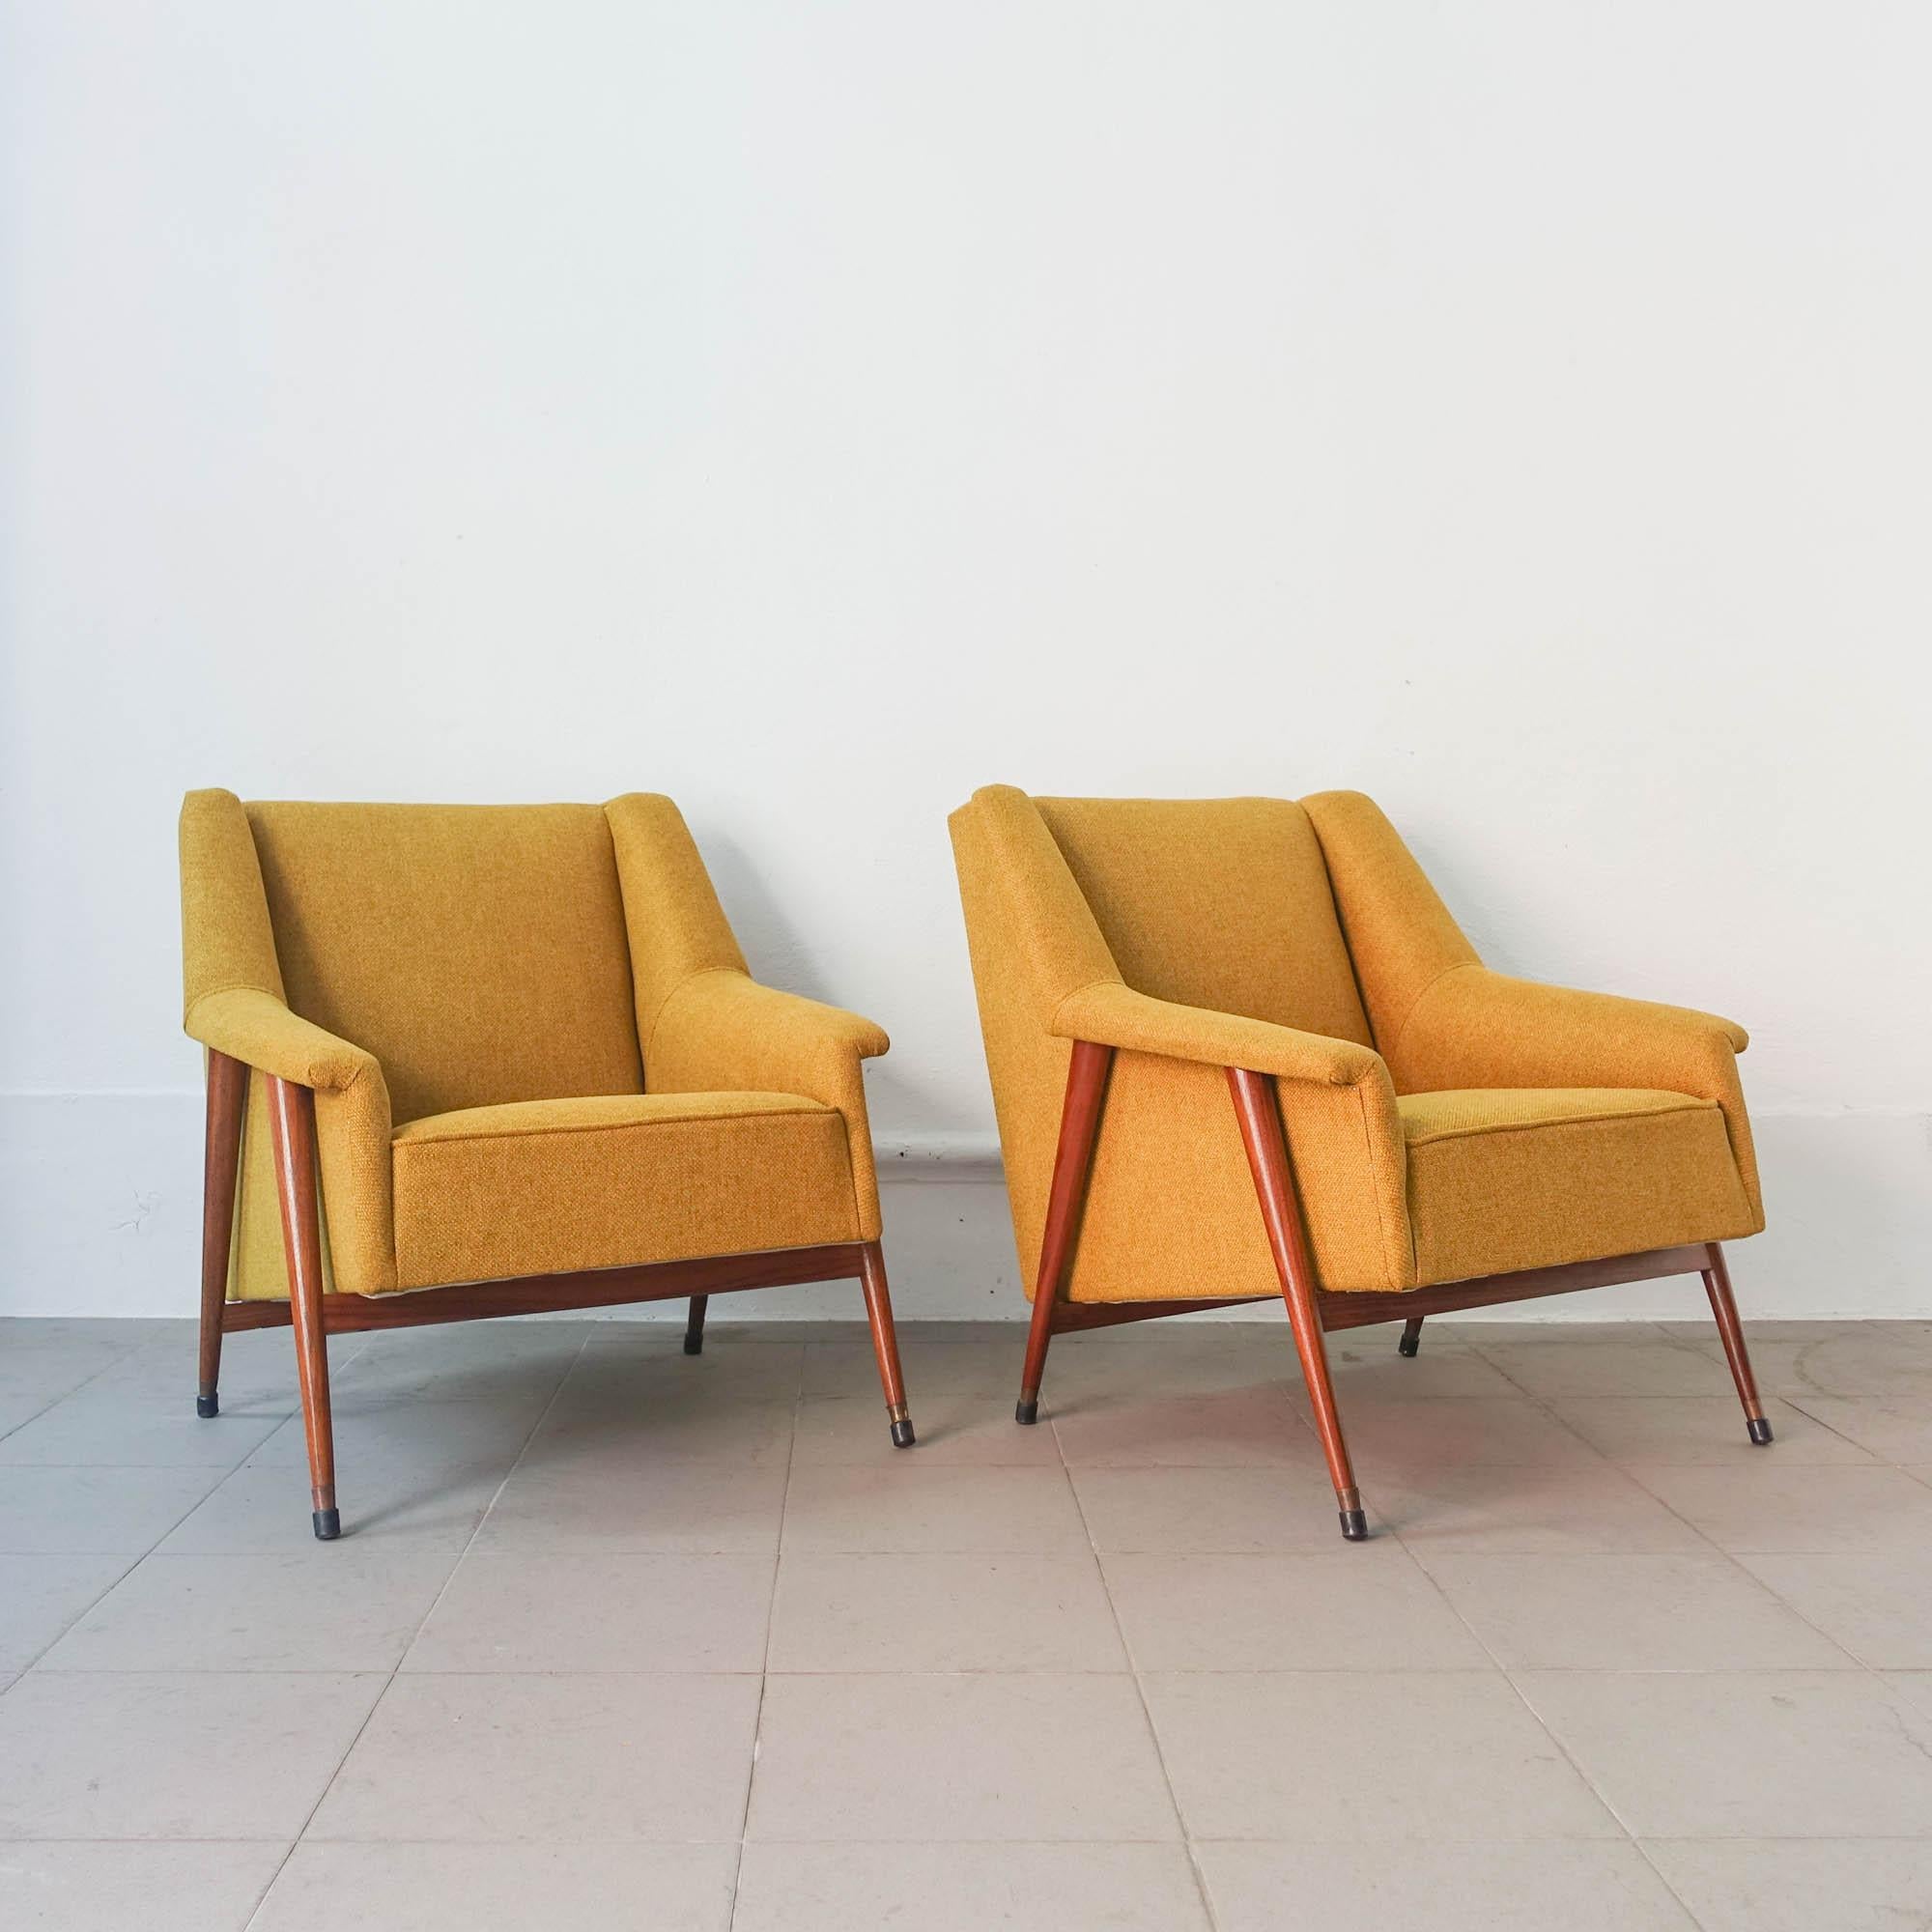 This pair of Easy chairs was designed by José Espinho for Olaio, in Portugal in 1959. The wood structure was fully restored and in one of the armchairs is solid sucupira wood and the other in solid undianuno wood. They have clean and elegant lines.